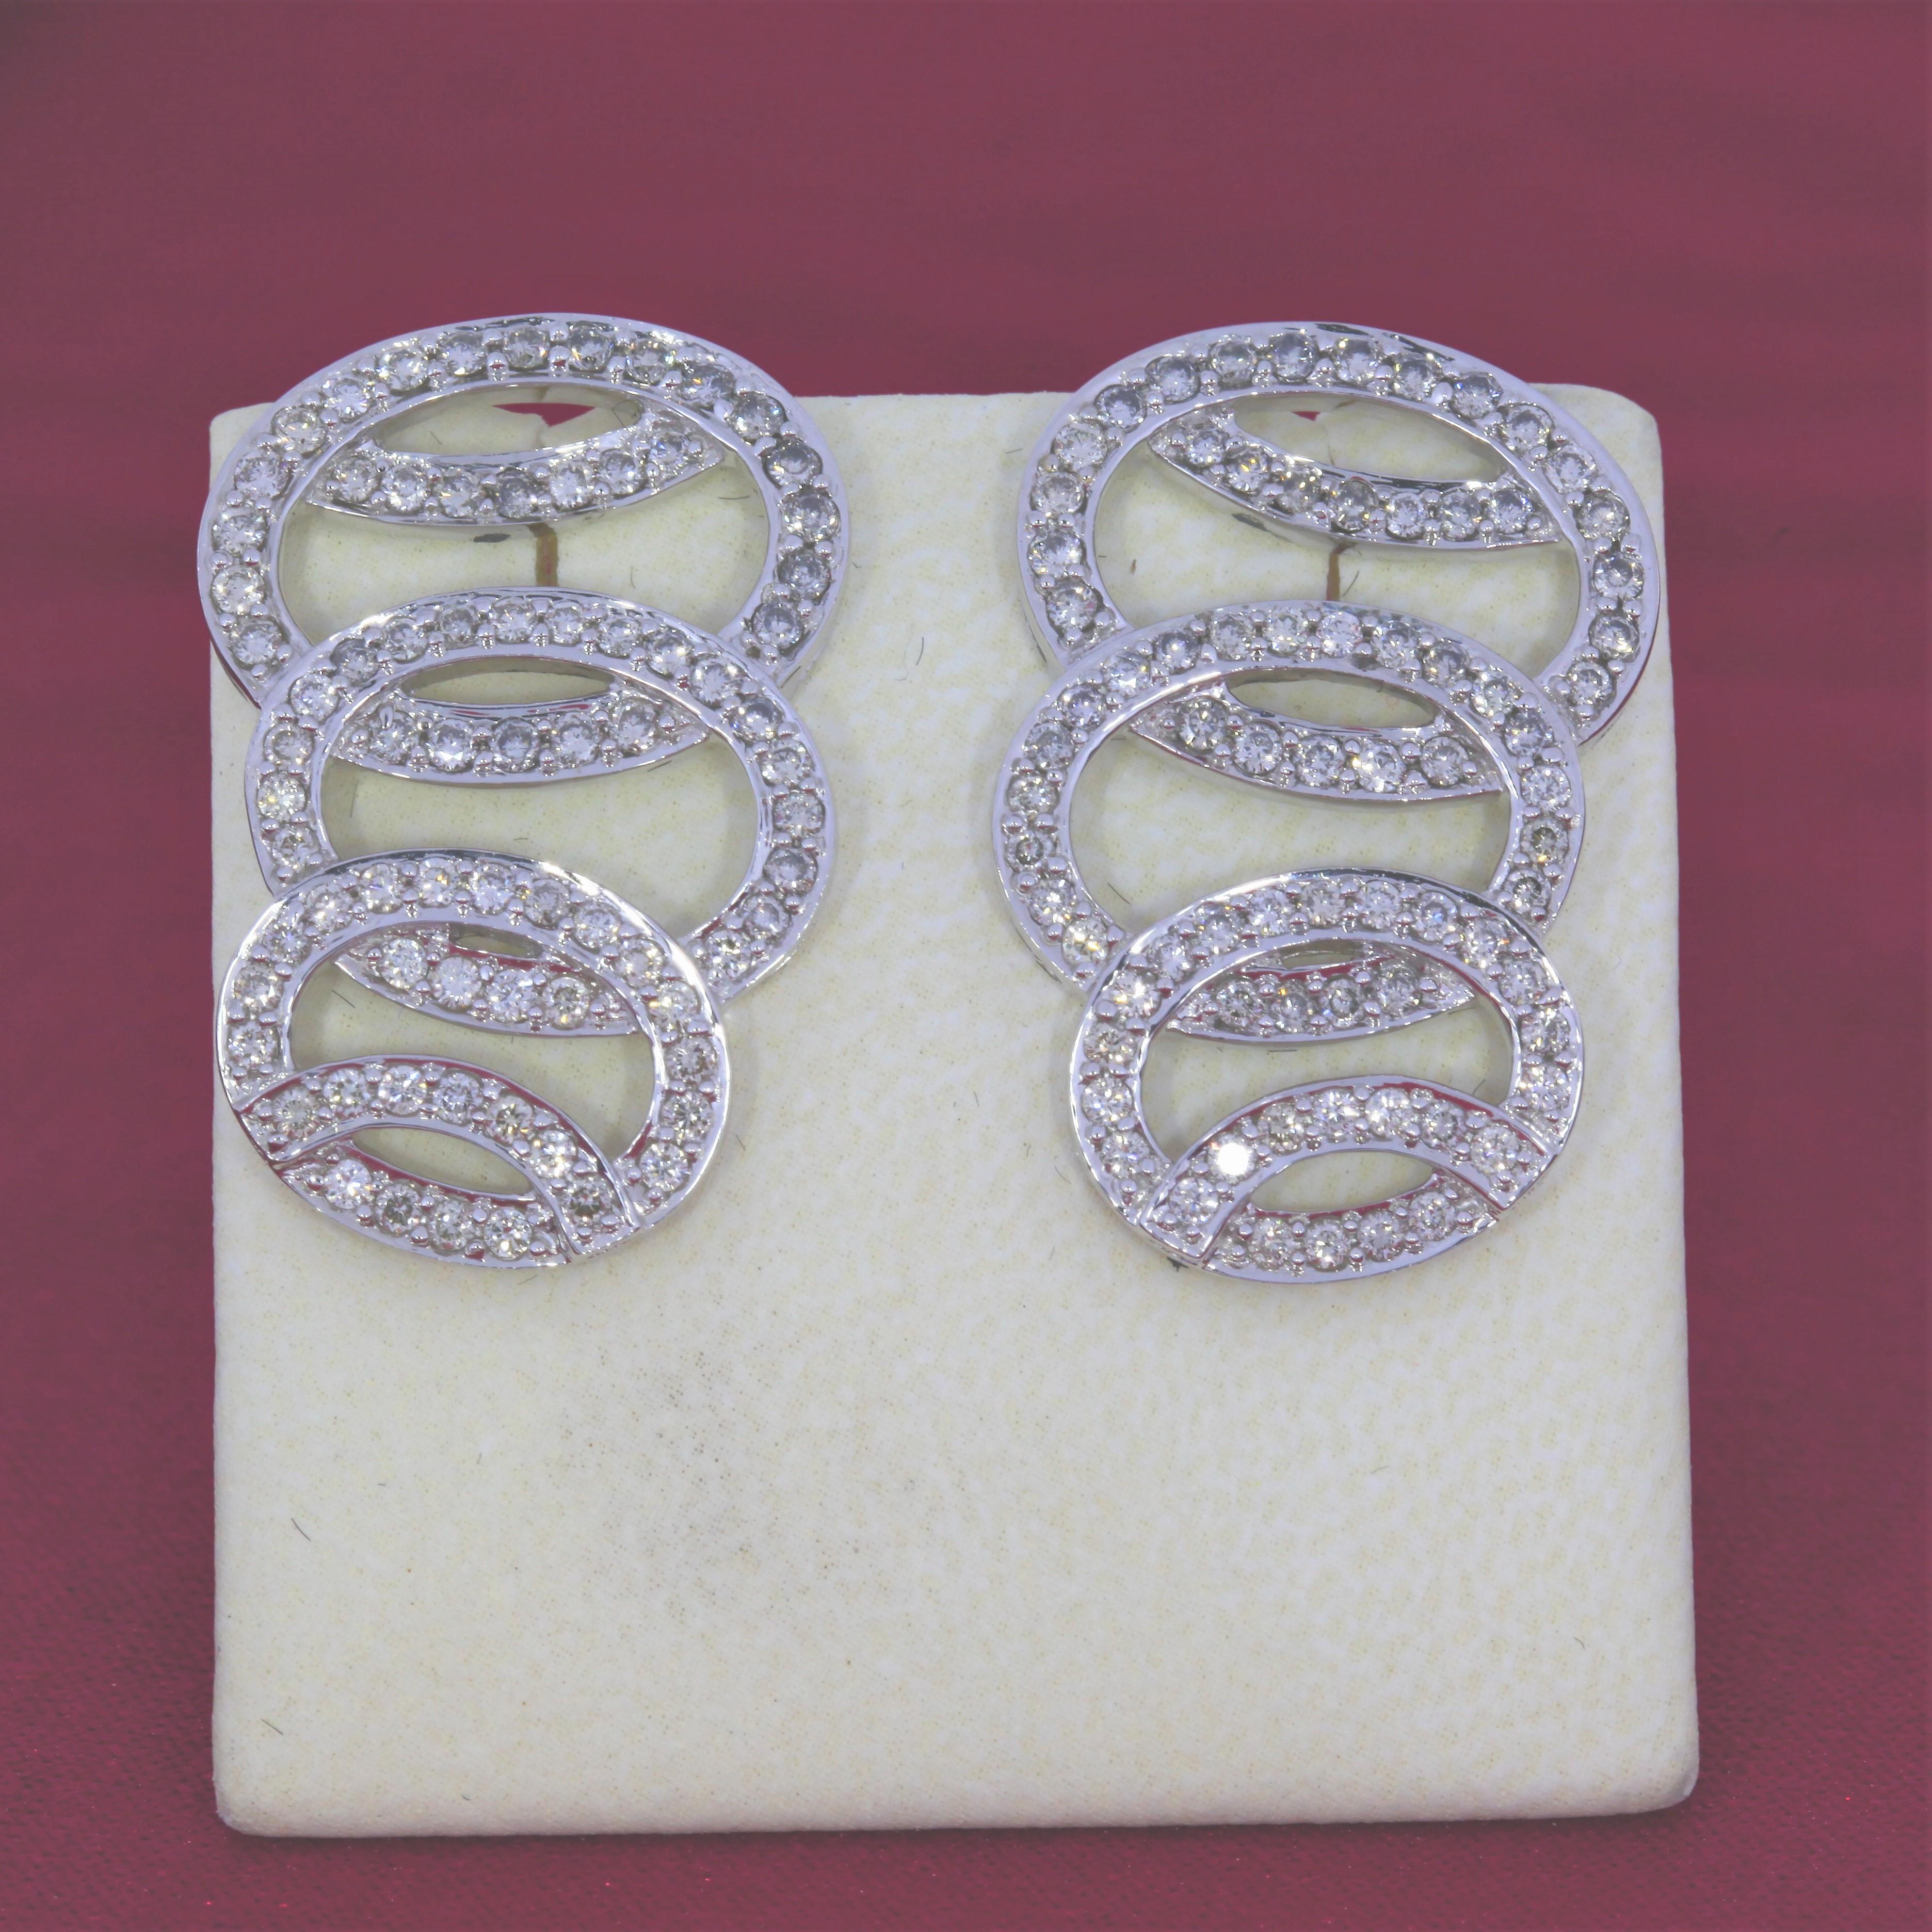 These vintage 14 karat white gold earrings prominently feature G-H VS Quality diamonds.